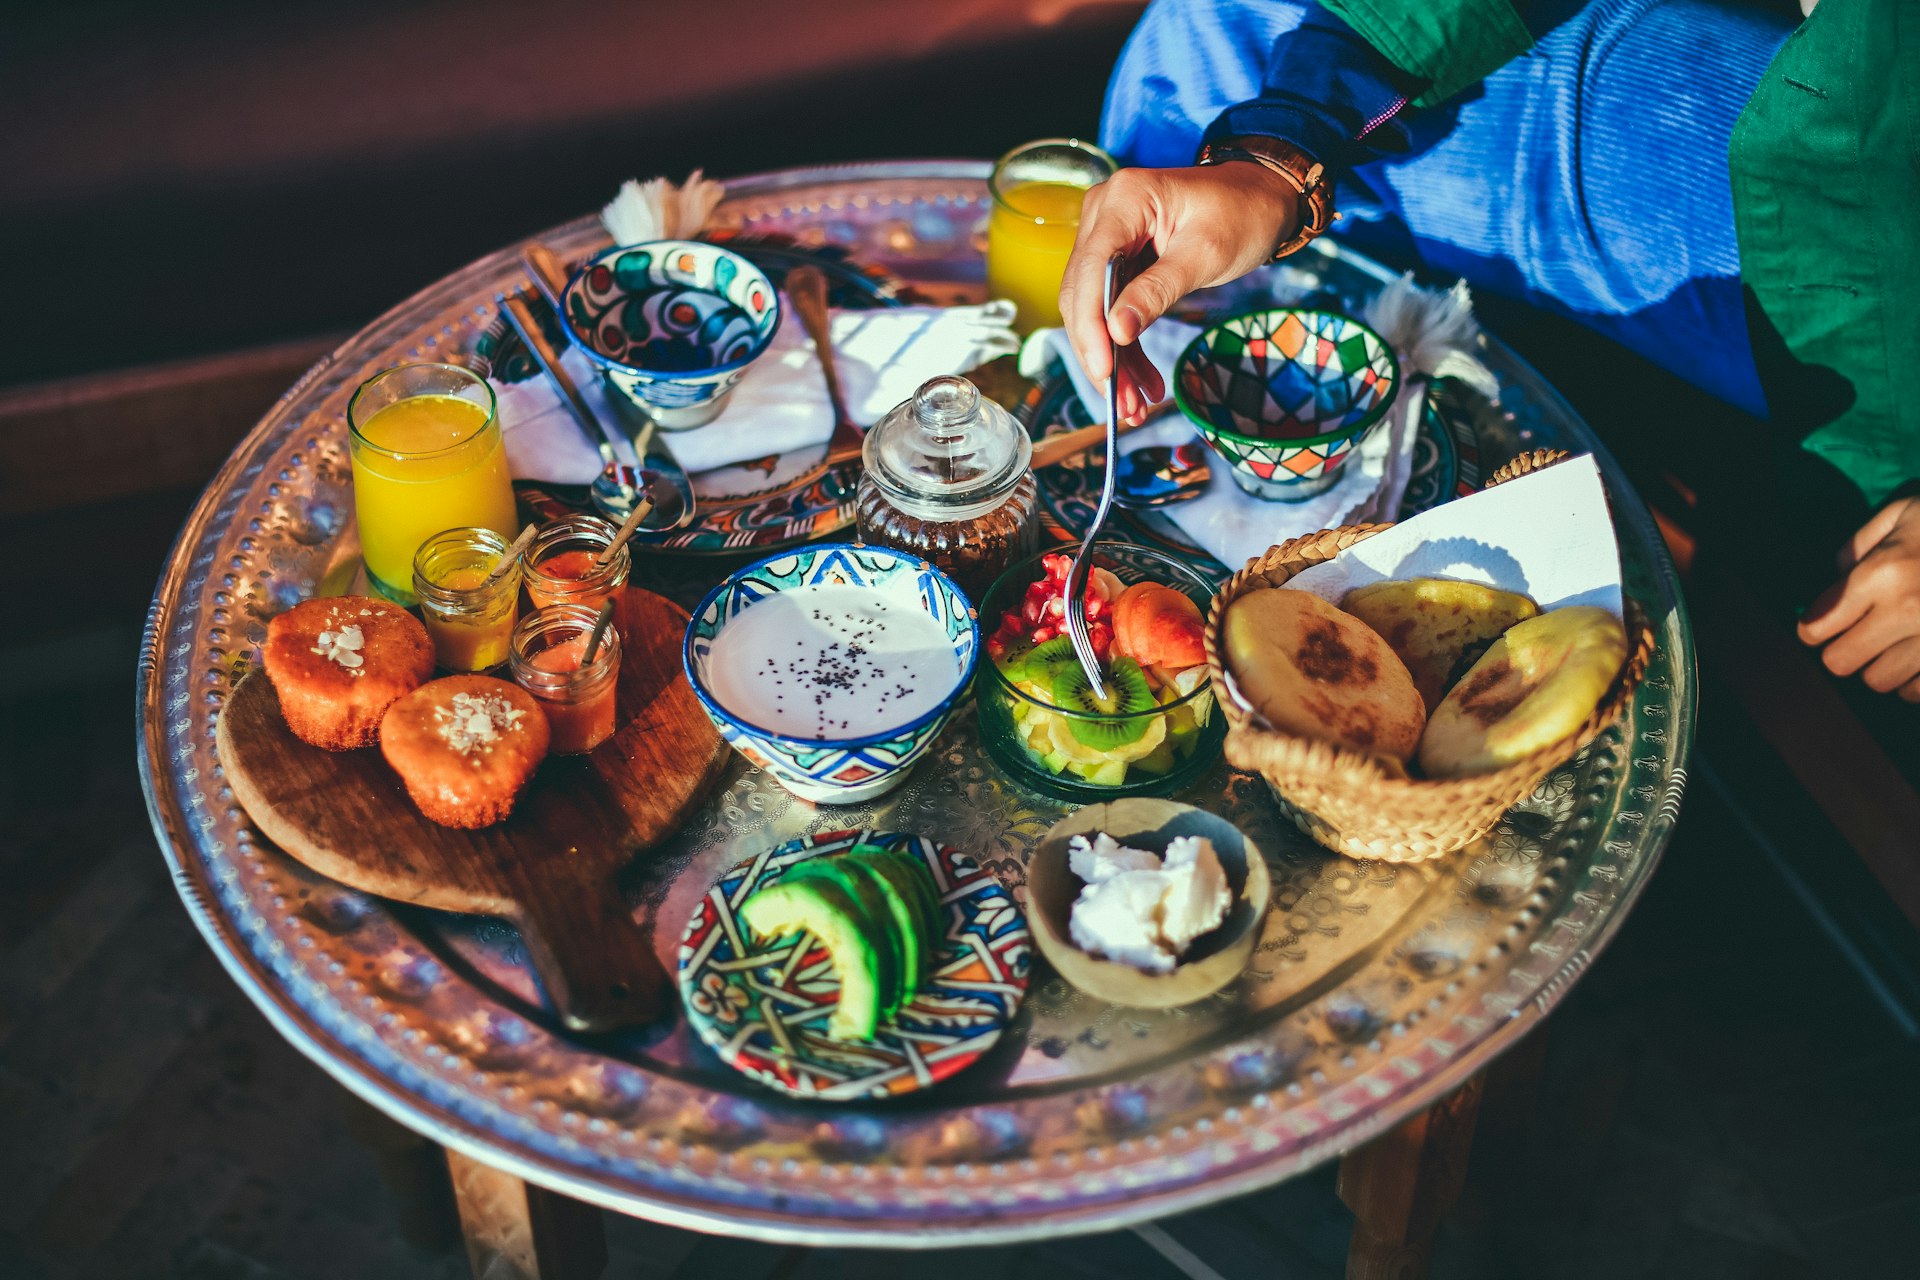 A breakfast spread in Morocco, with fresh juice, fruit, muffins, honey, yogurt and avocado